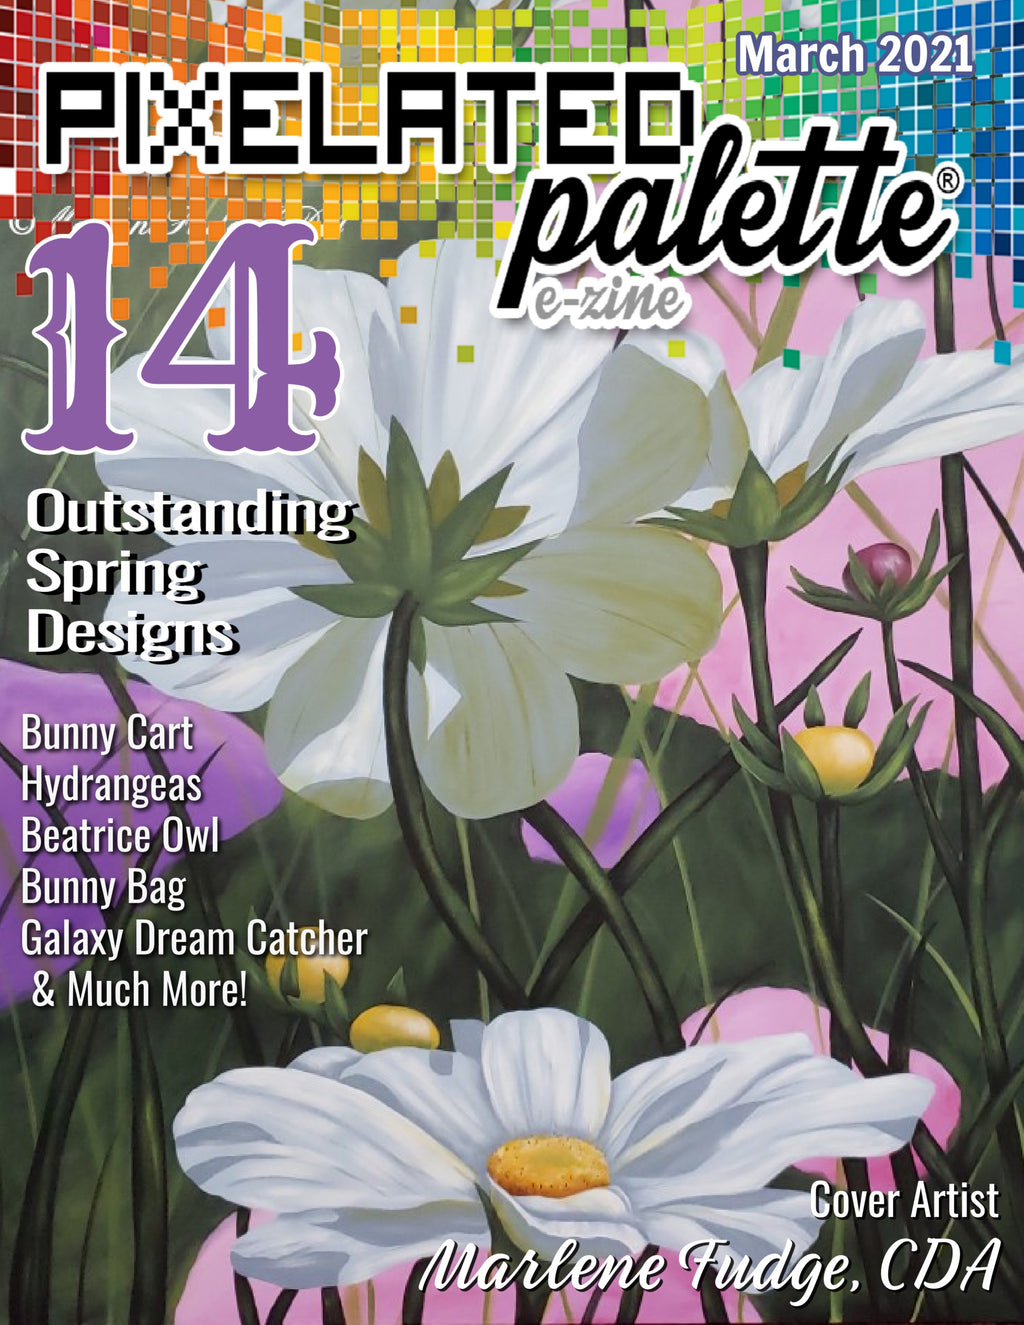 Pixelated Palette - March 2021 Issue Download